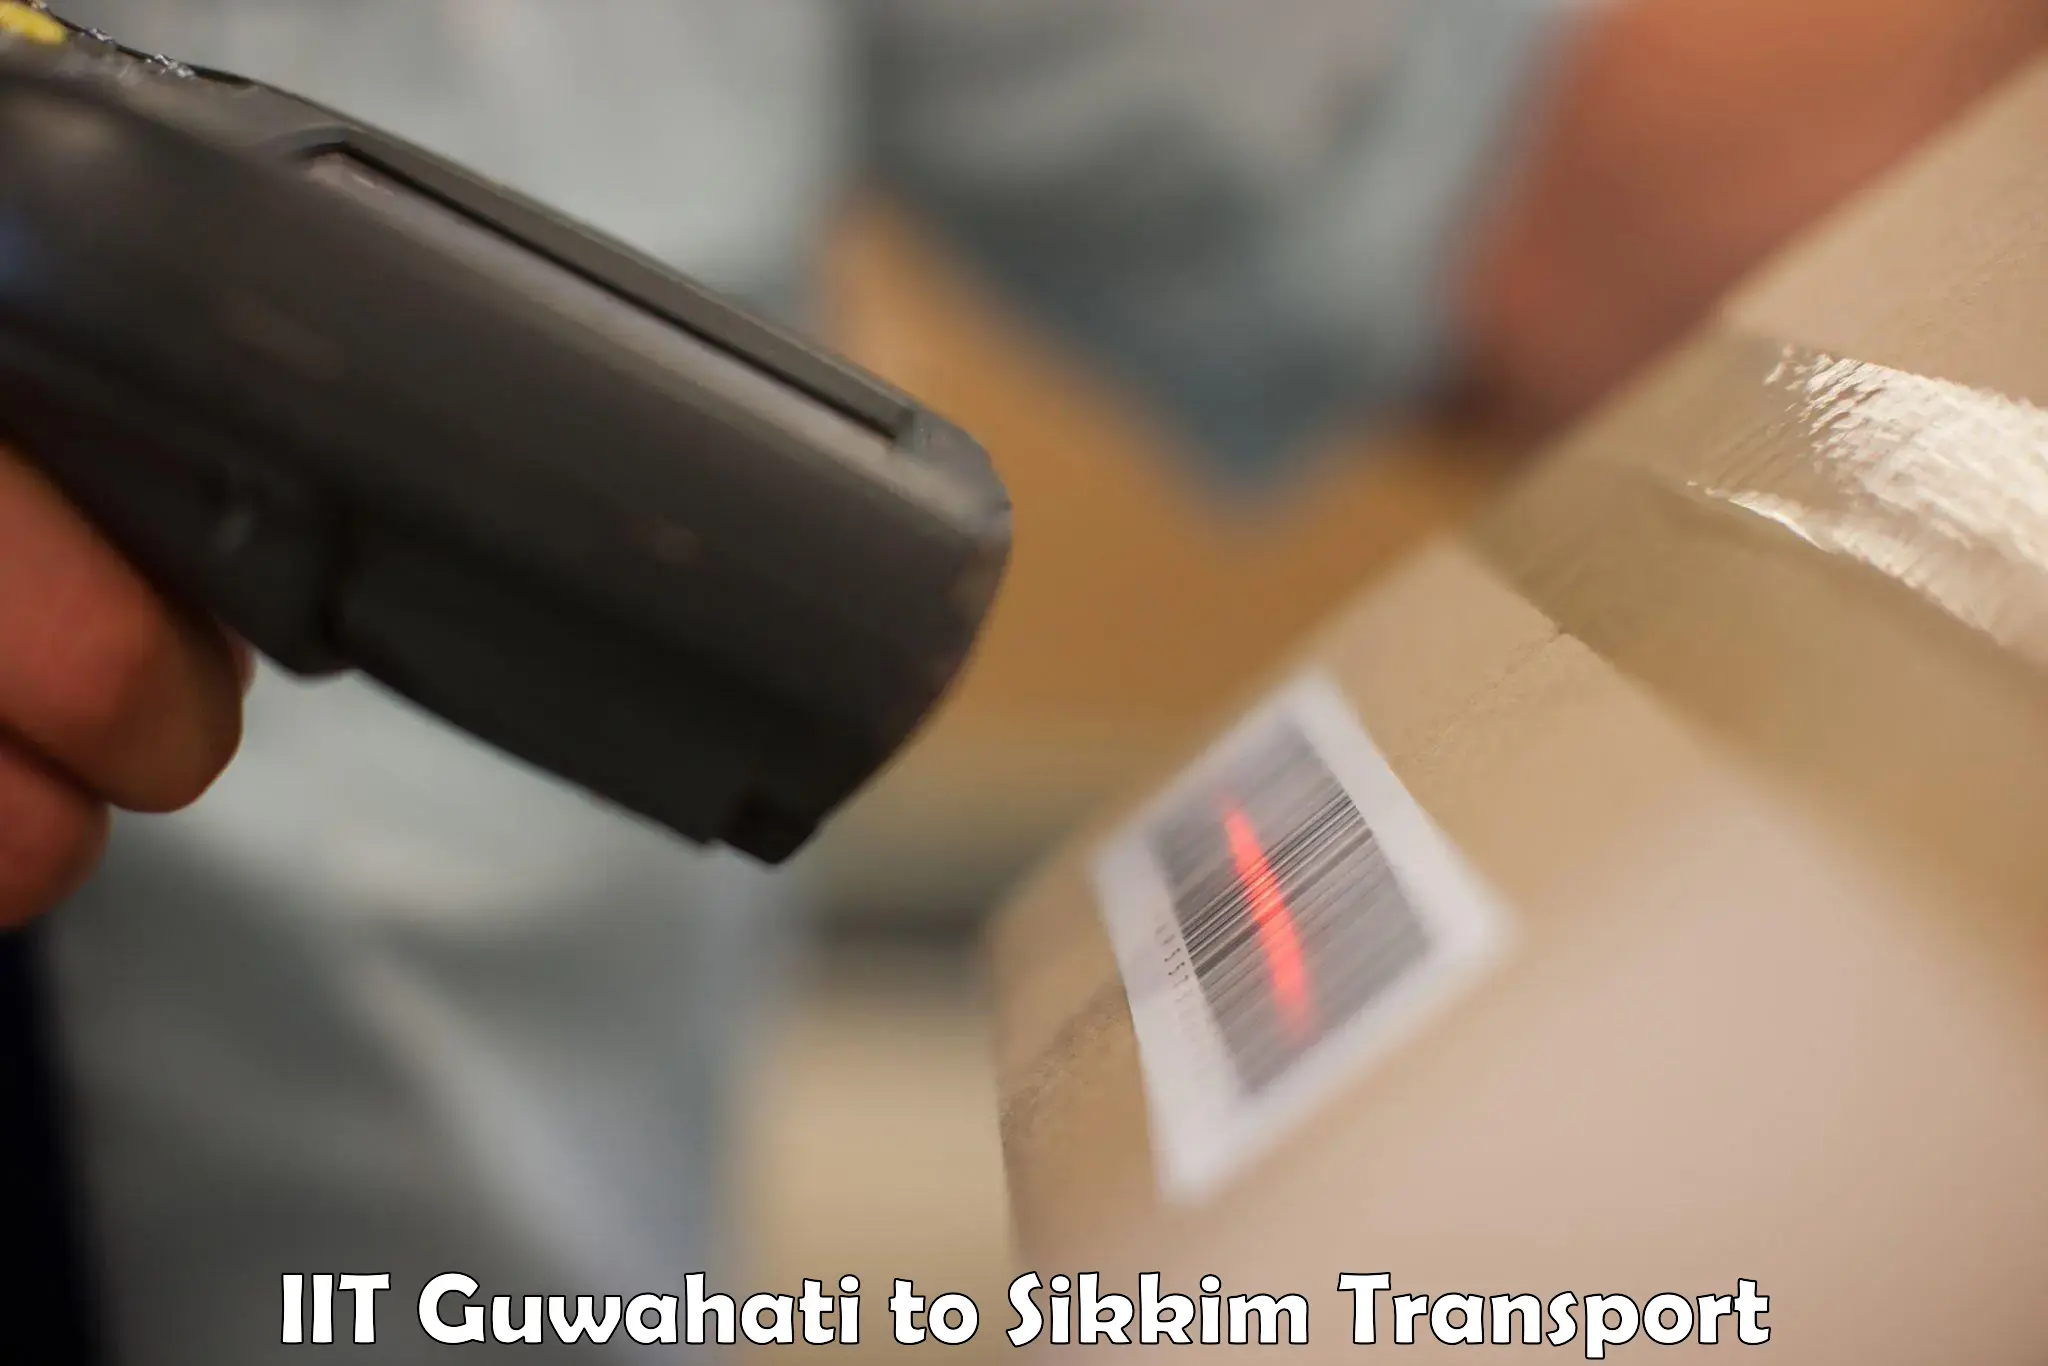 Air freight transport services in IIT Guwahati to Pelling